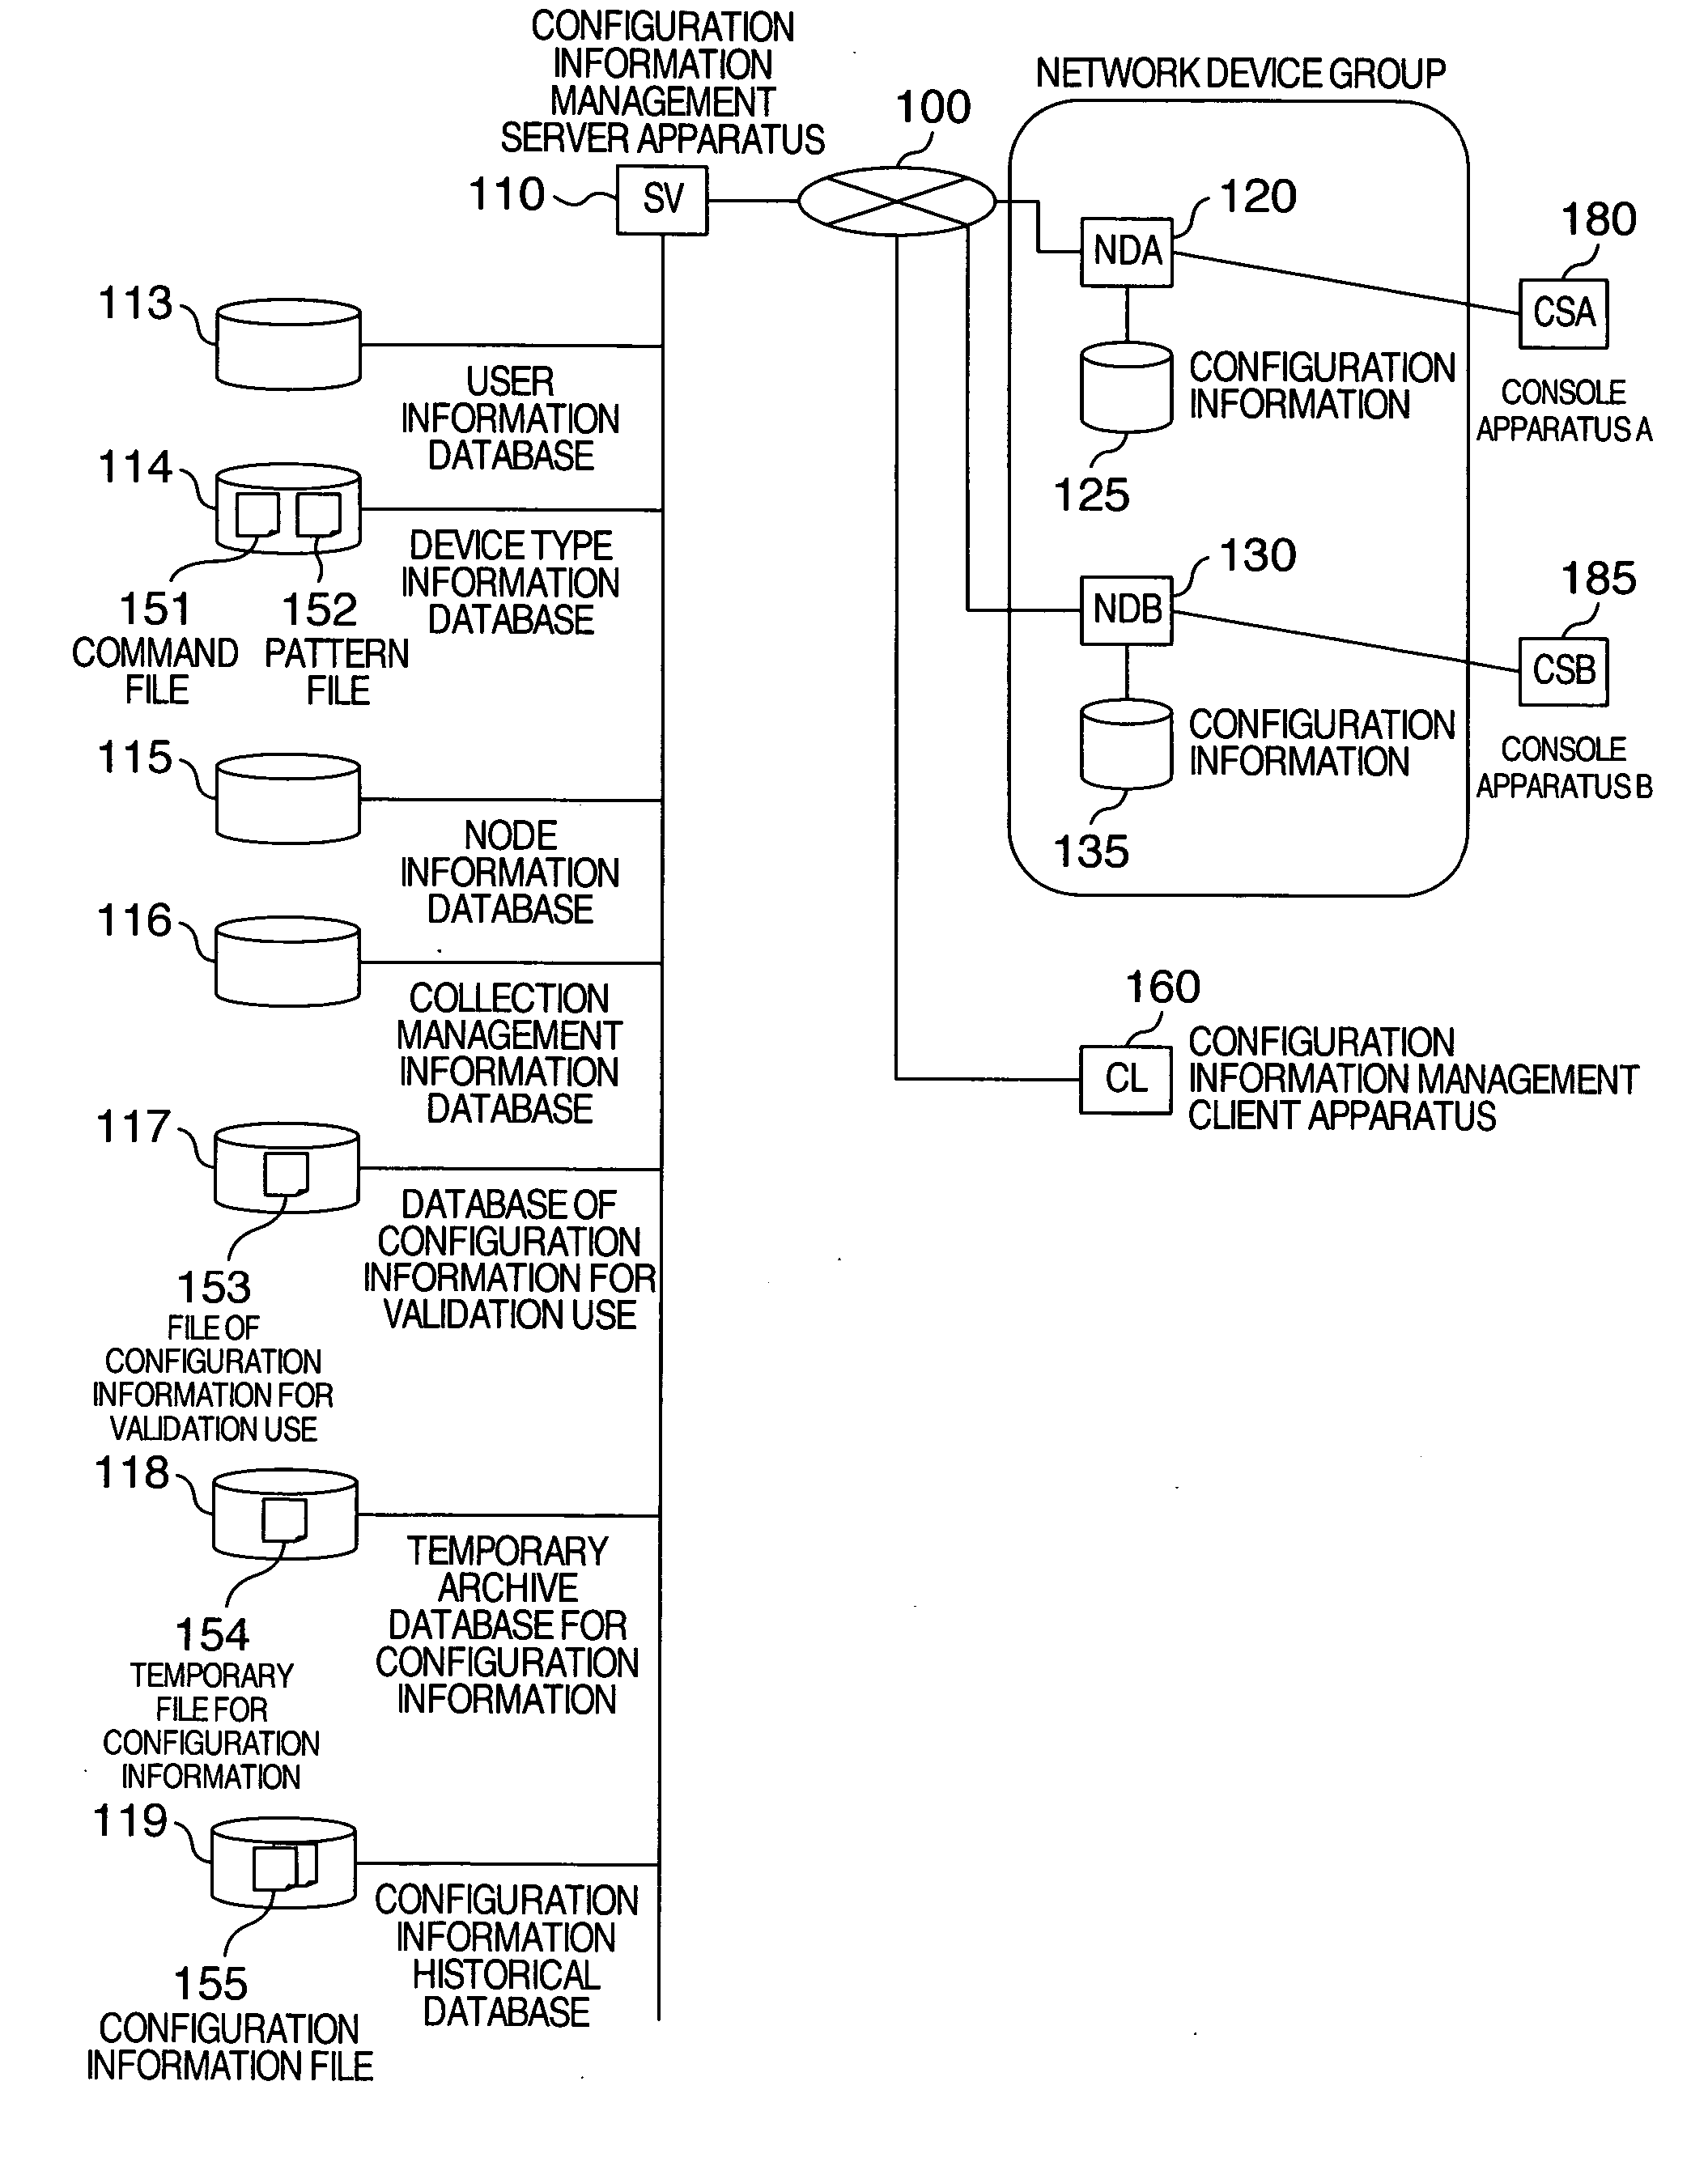 Method and apparatus for managing configuration information, and configuration information managing system using the apparatus